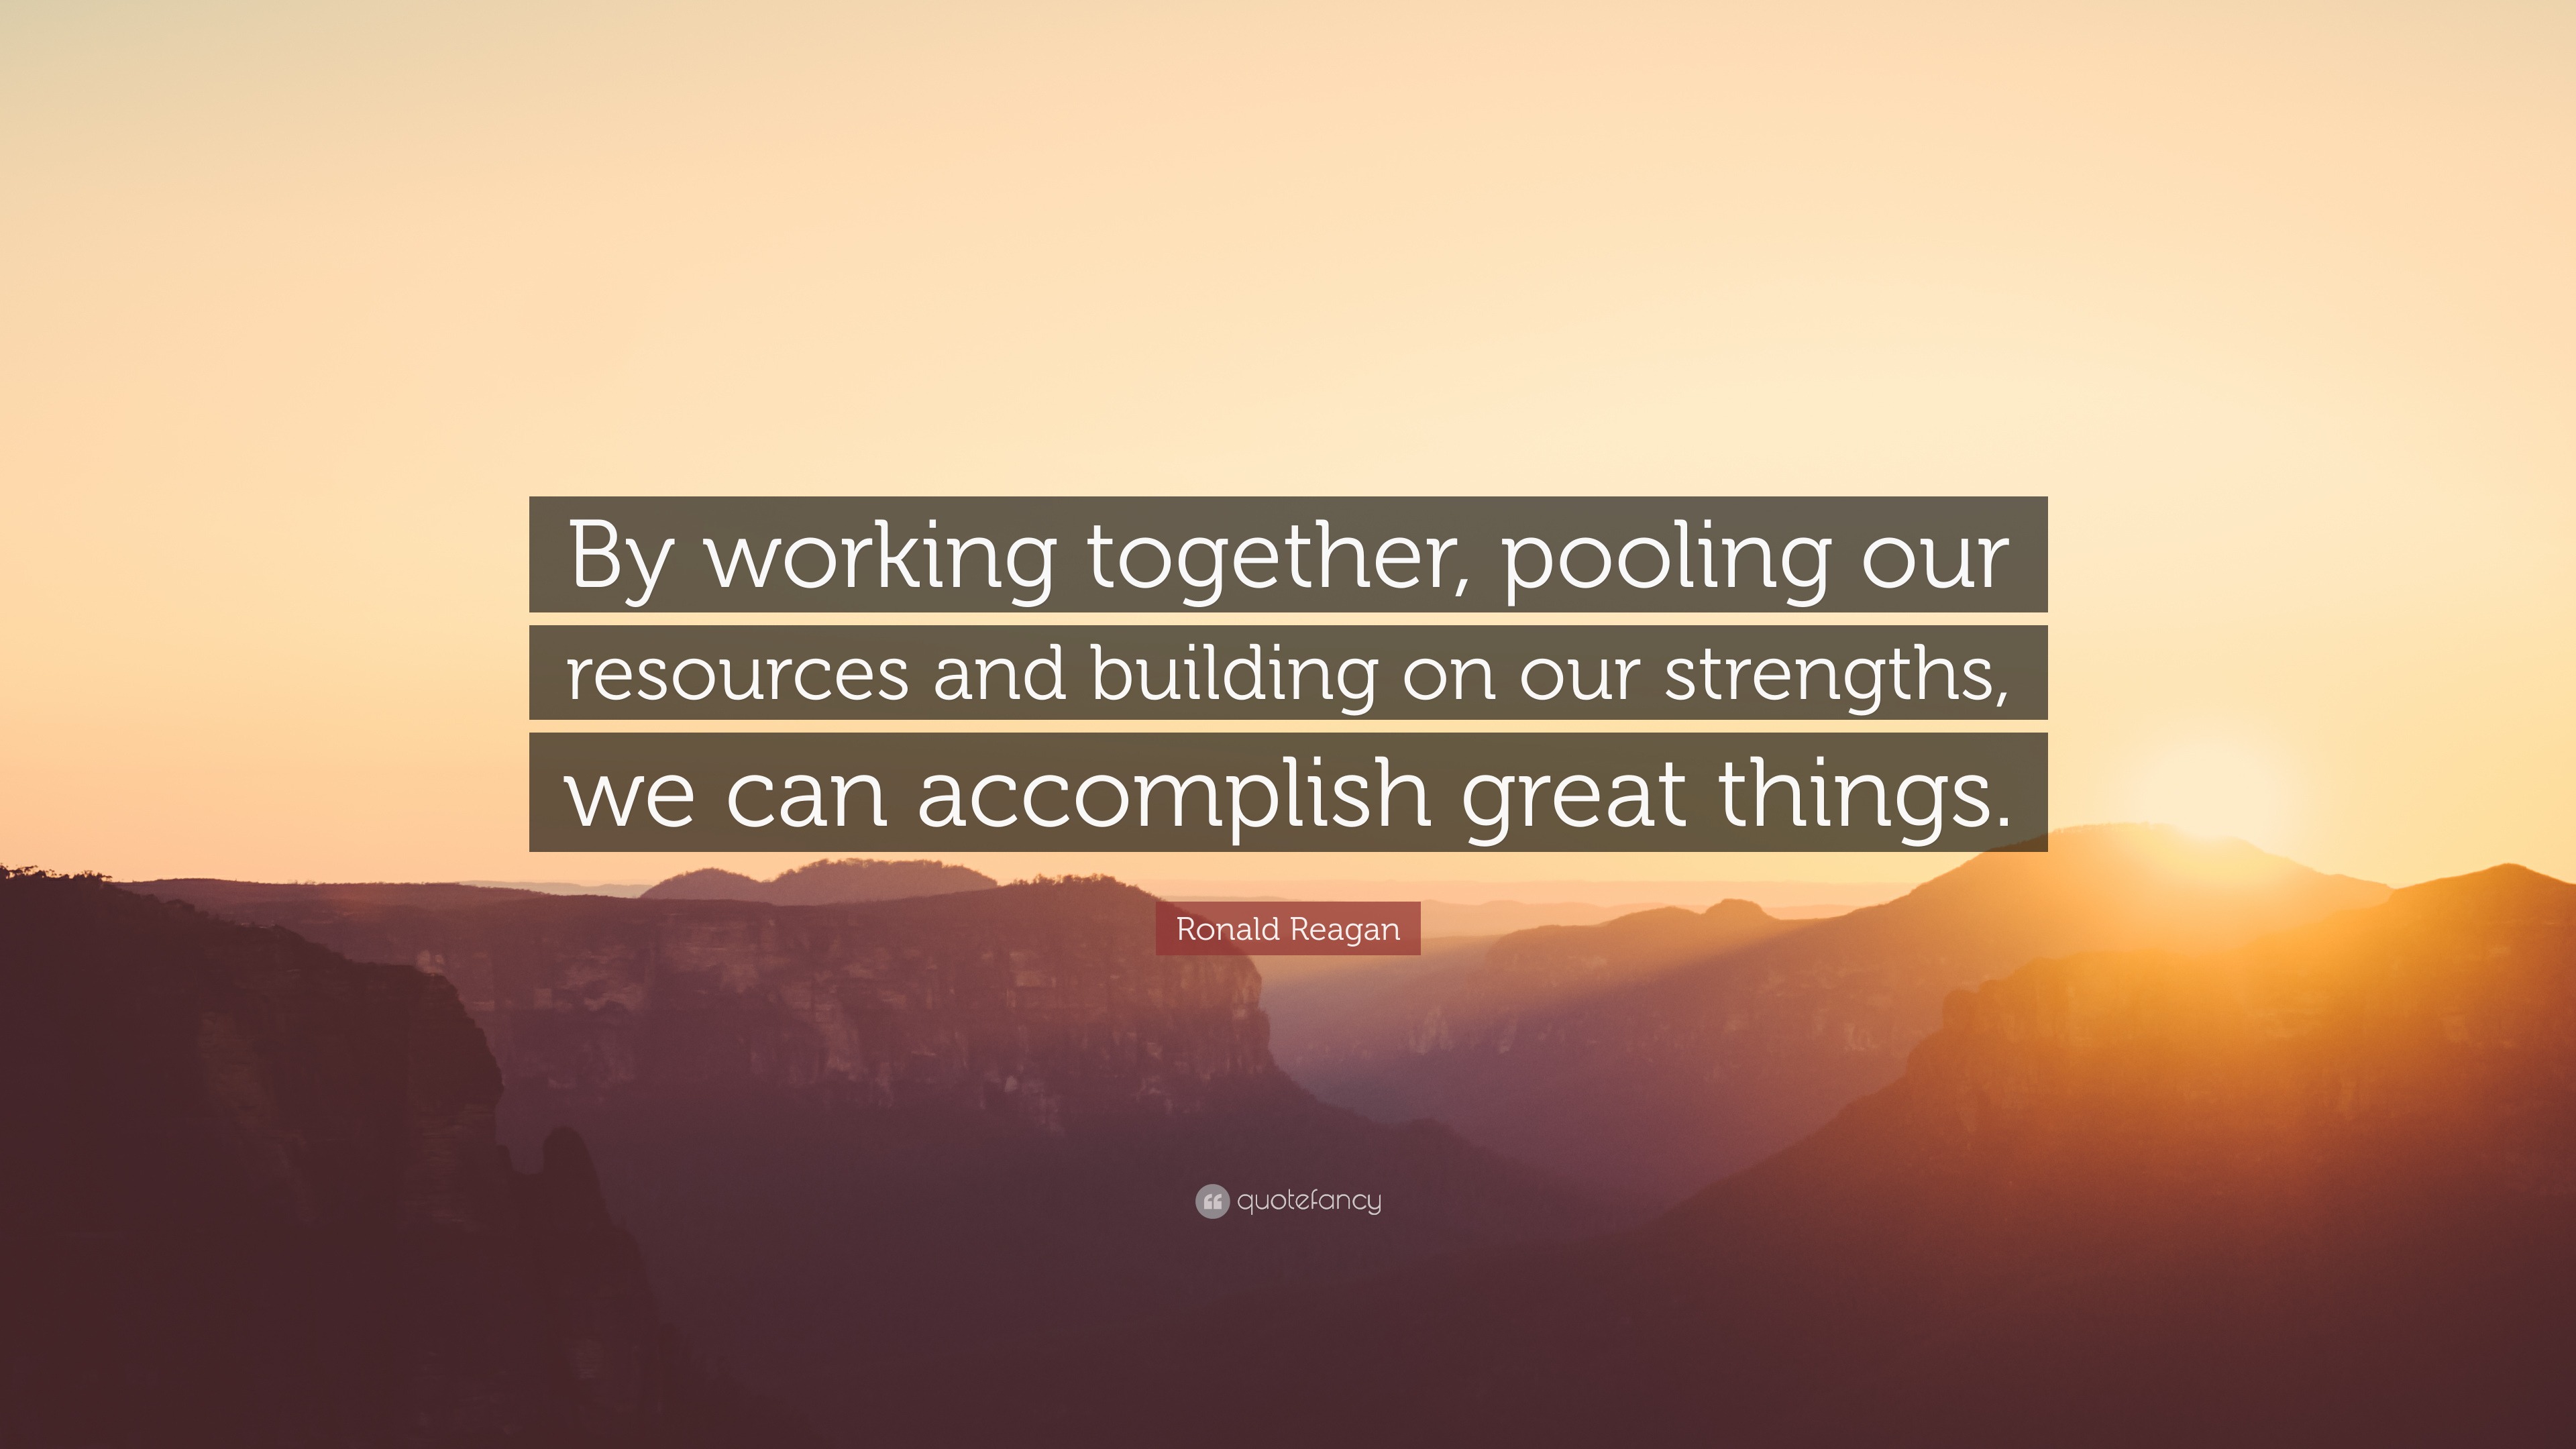 Ronald Reagan Quote: “By working together, pooling our resources and